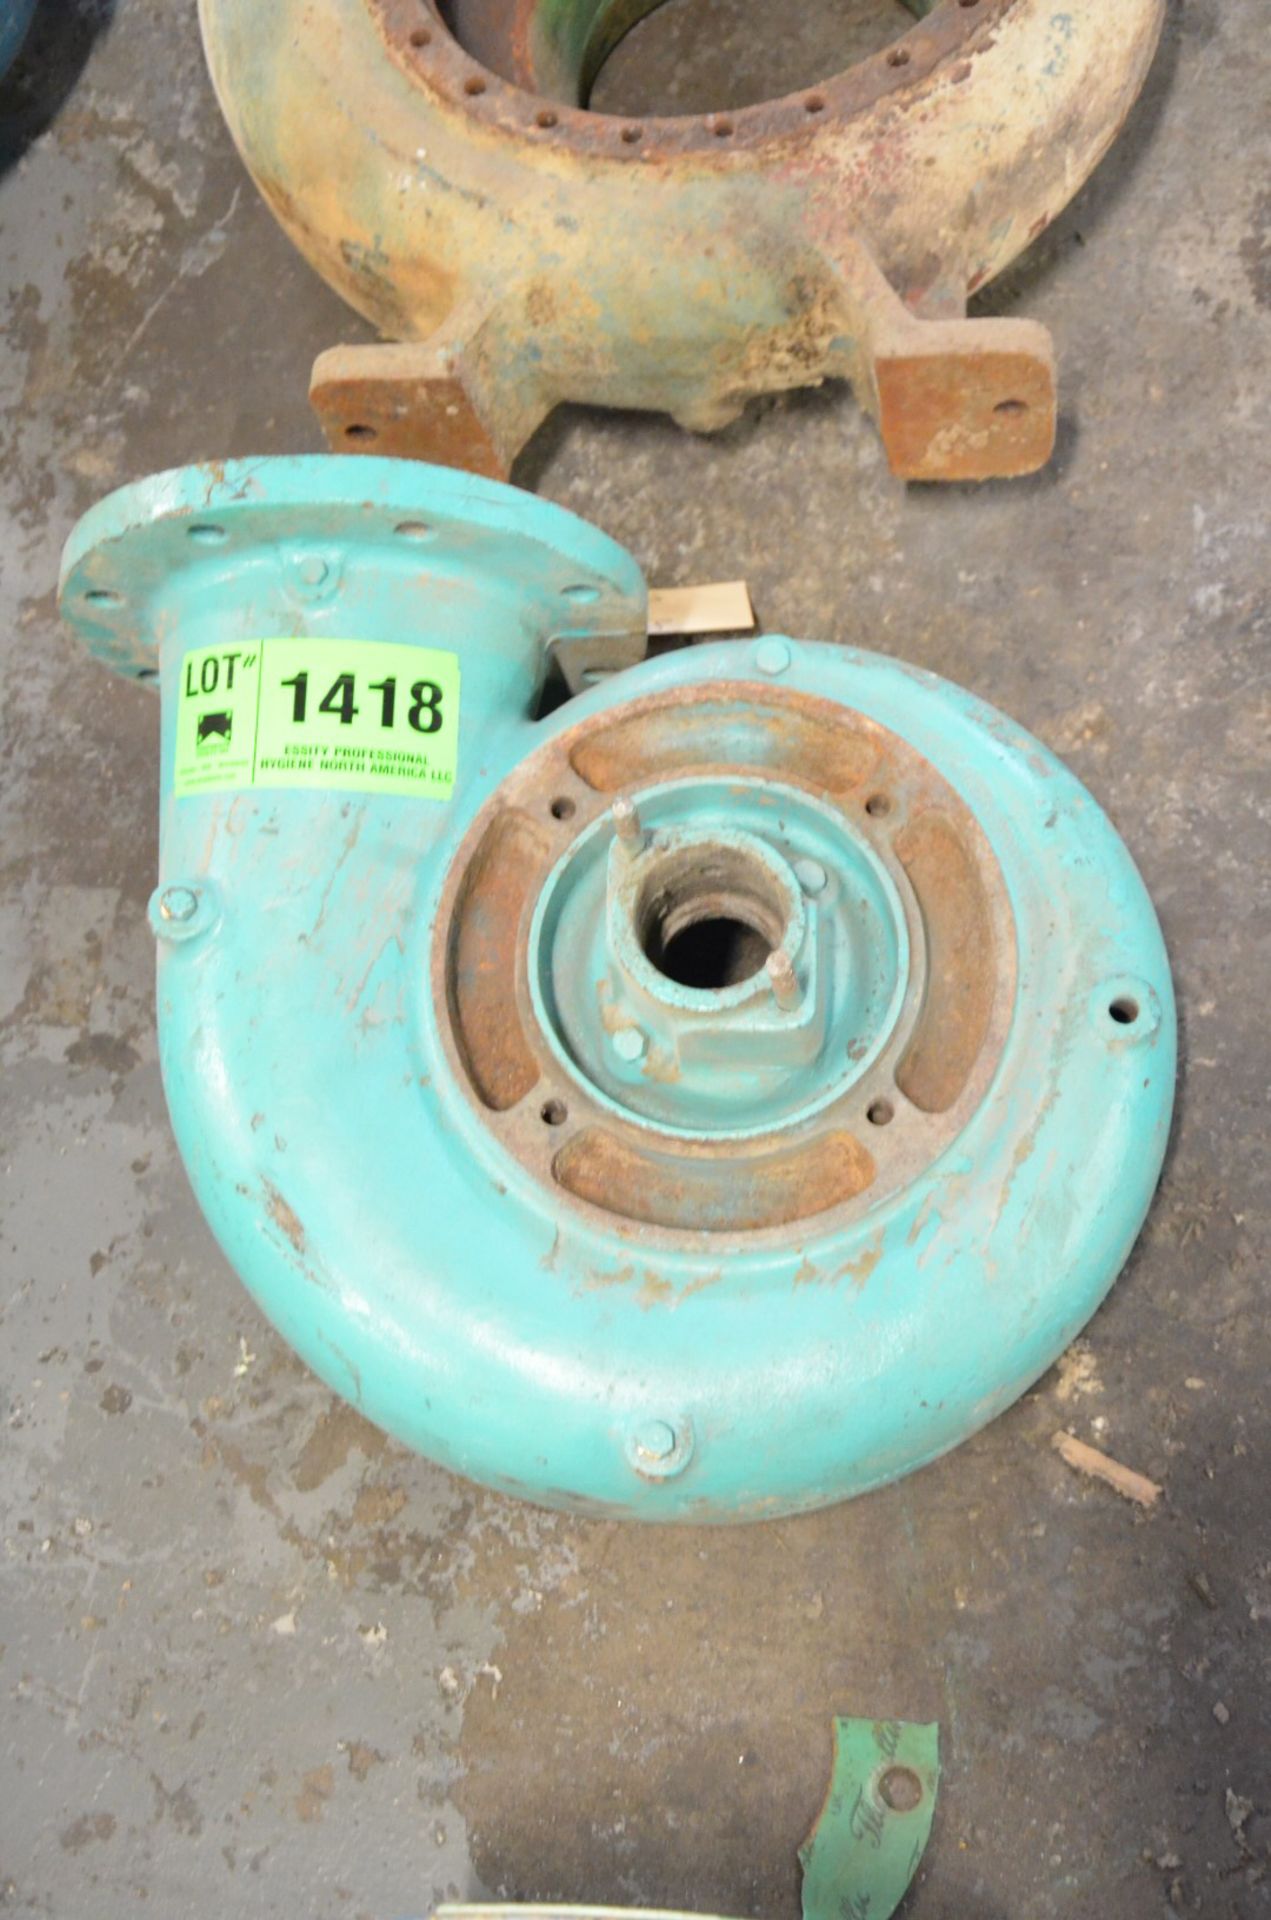 GOULDS PUMP HOUSING [RIGGING FEE FOR LOT #1418 - $25 USD PLUS APPLICABLE TAXES]